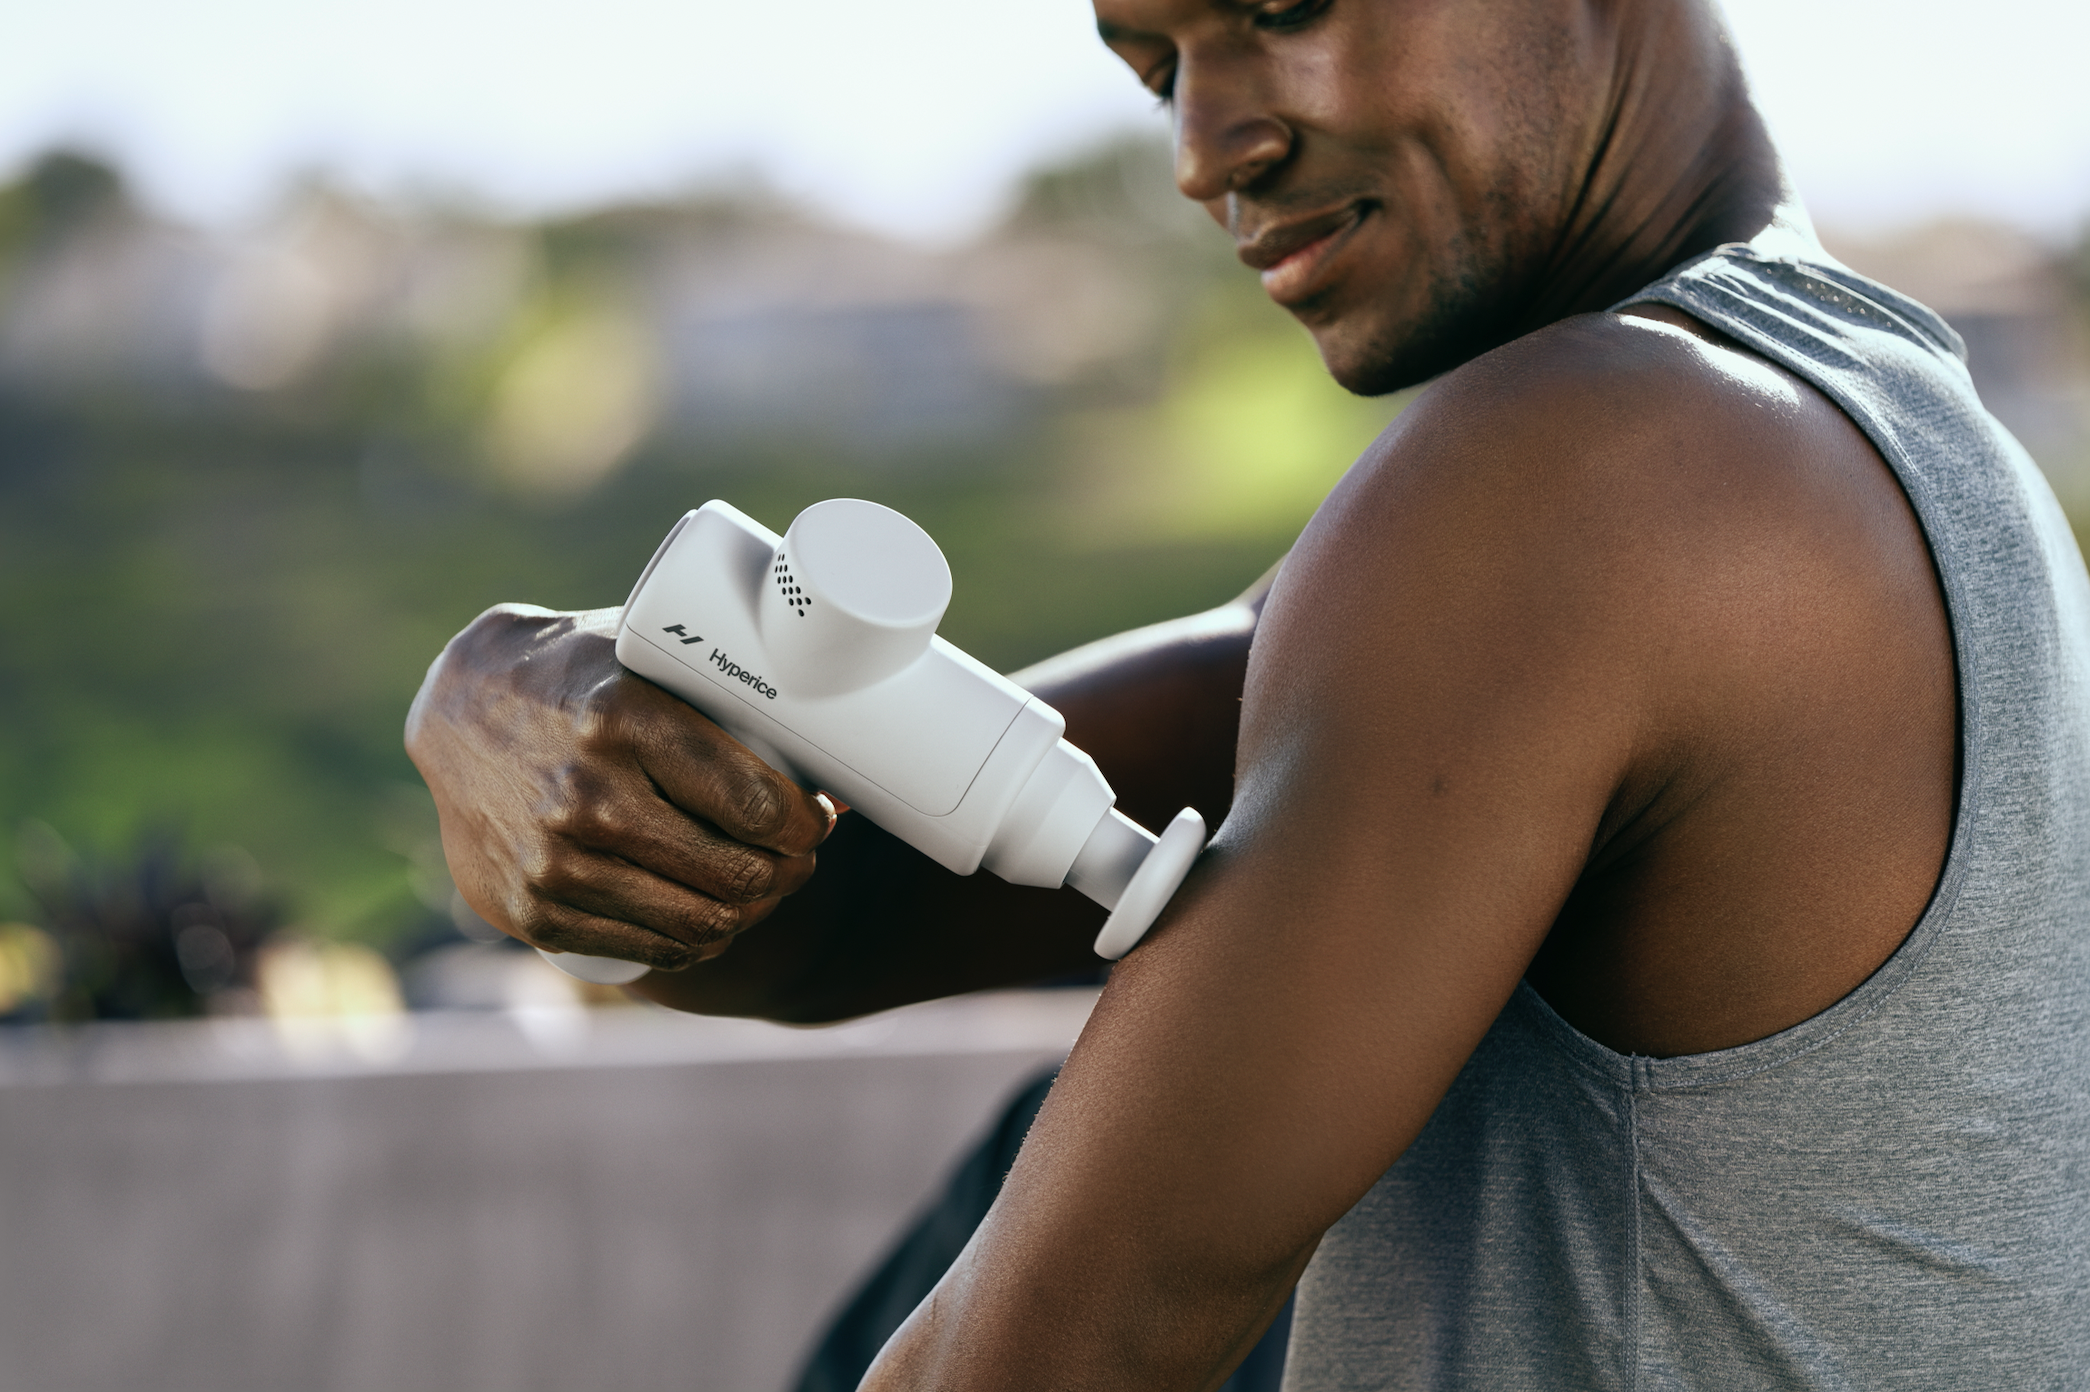 The New Hypervolt Go 2 Massage Gun Is an Improved Recovery Tool